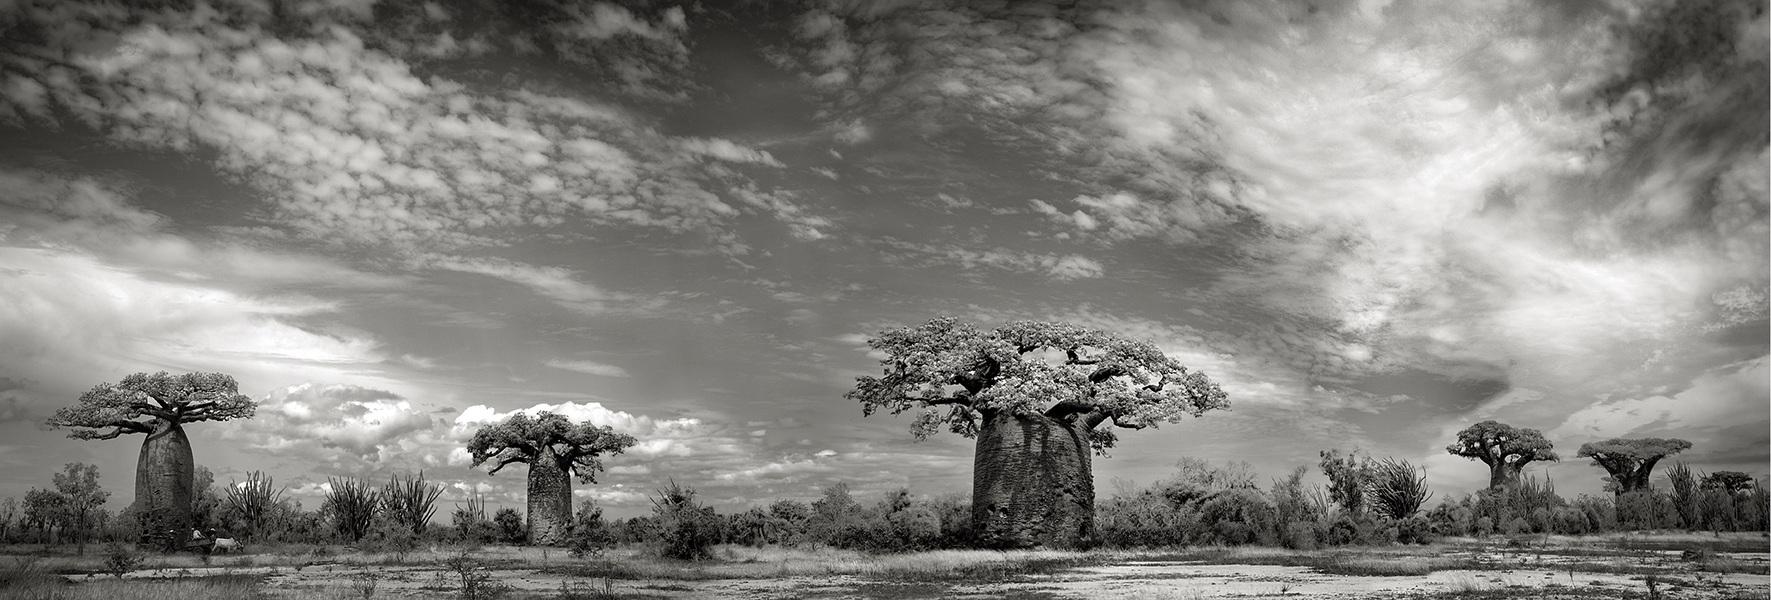 baobabs-vii-andombiry-forest